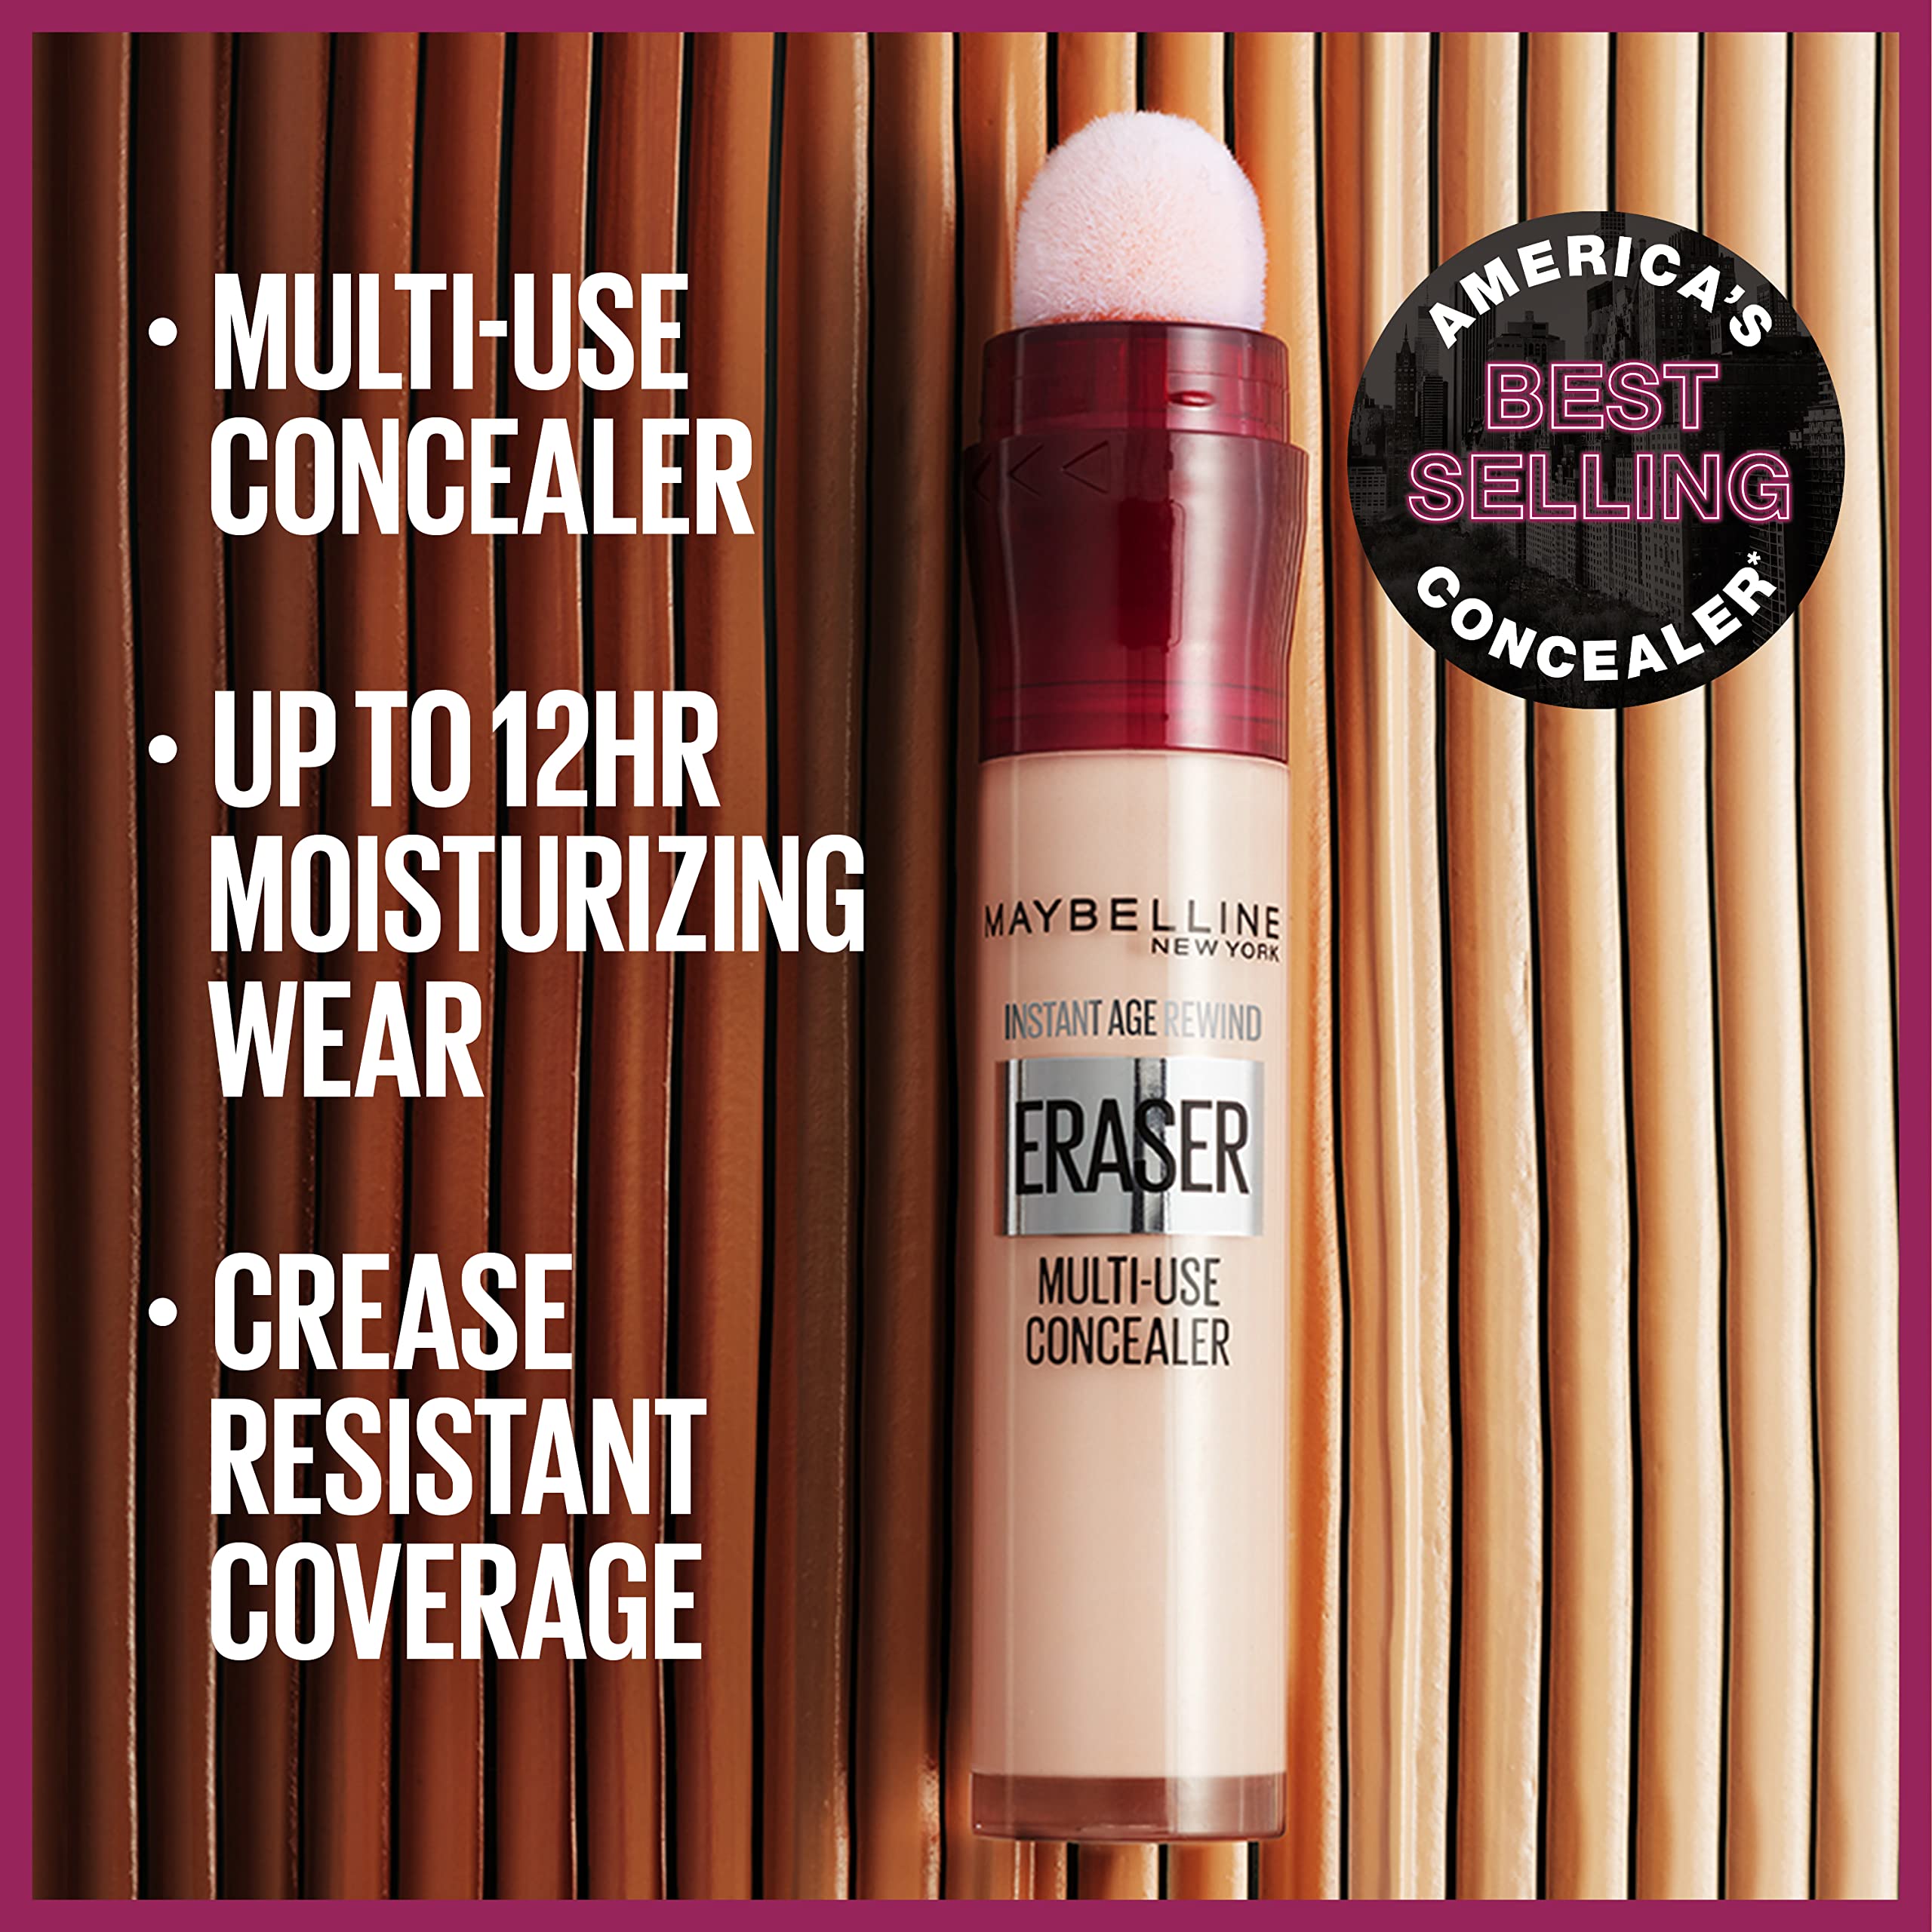 Maybelline Instant Age Rewind Eraser Dark Circles Treatment Multi-Use Concealer, 141, 1 Count (Packaging May Vary)